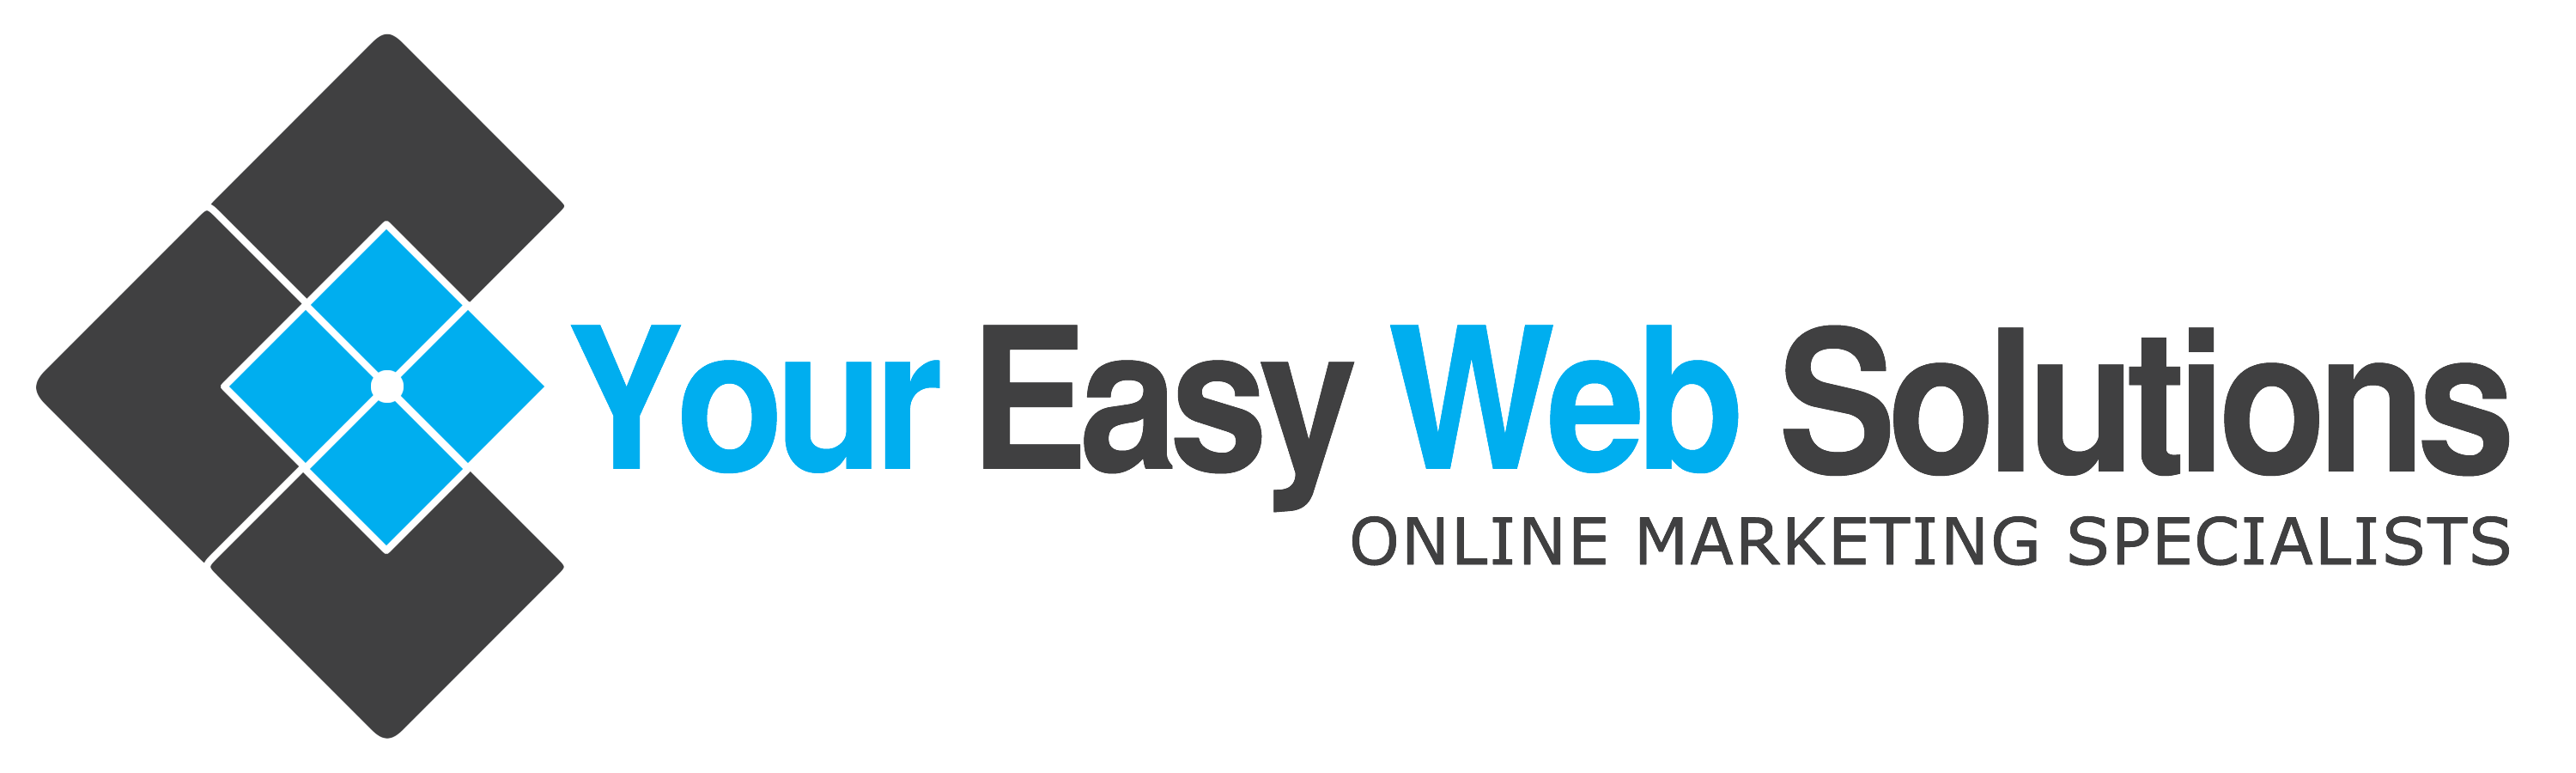 Your Easy Web Solutions Melbourne